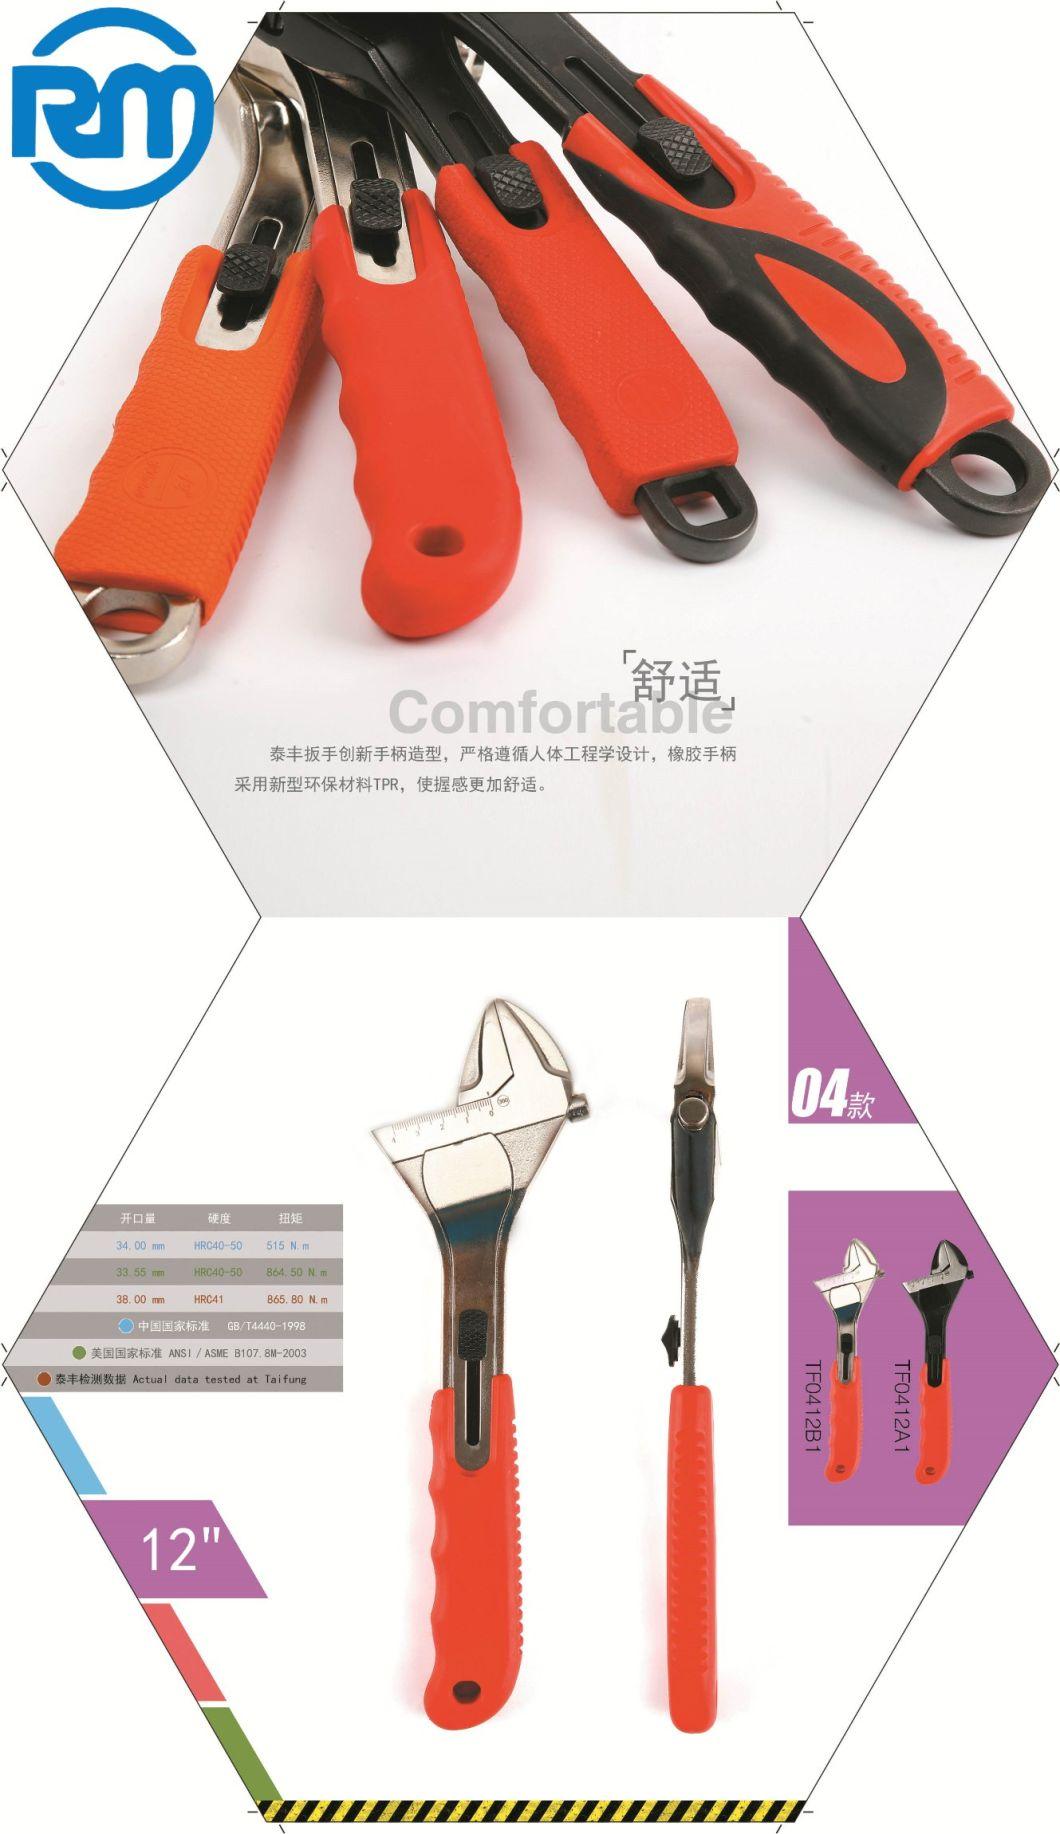 Ergonomic Design Material Trr Sliding Adjusting Button Strictly Controlled Nickel Plating Surface Easily Push and Pull